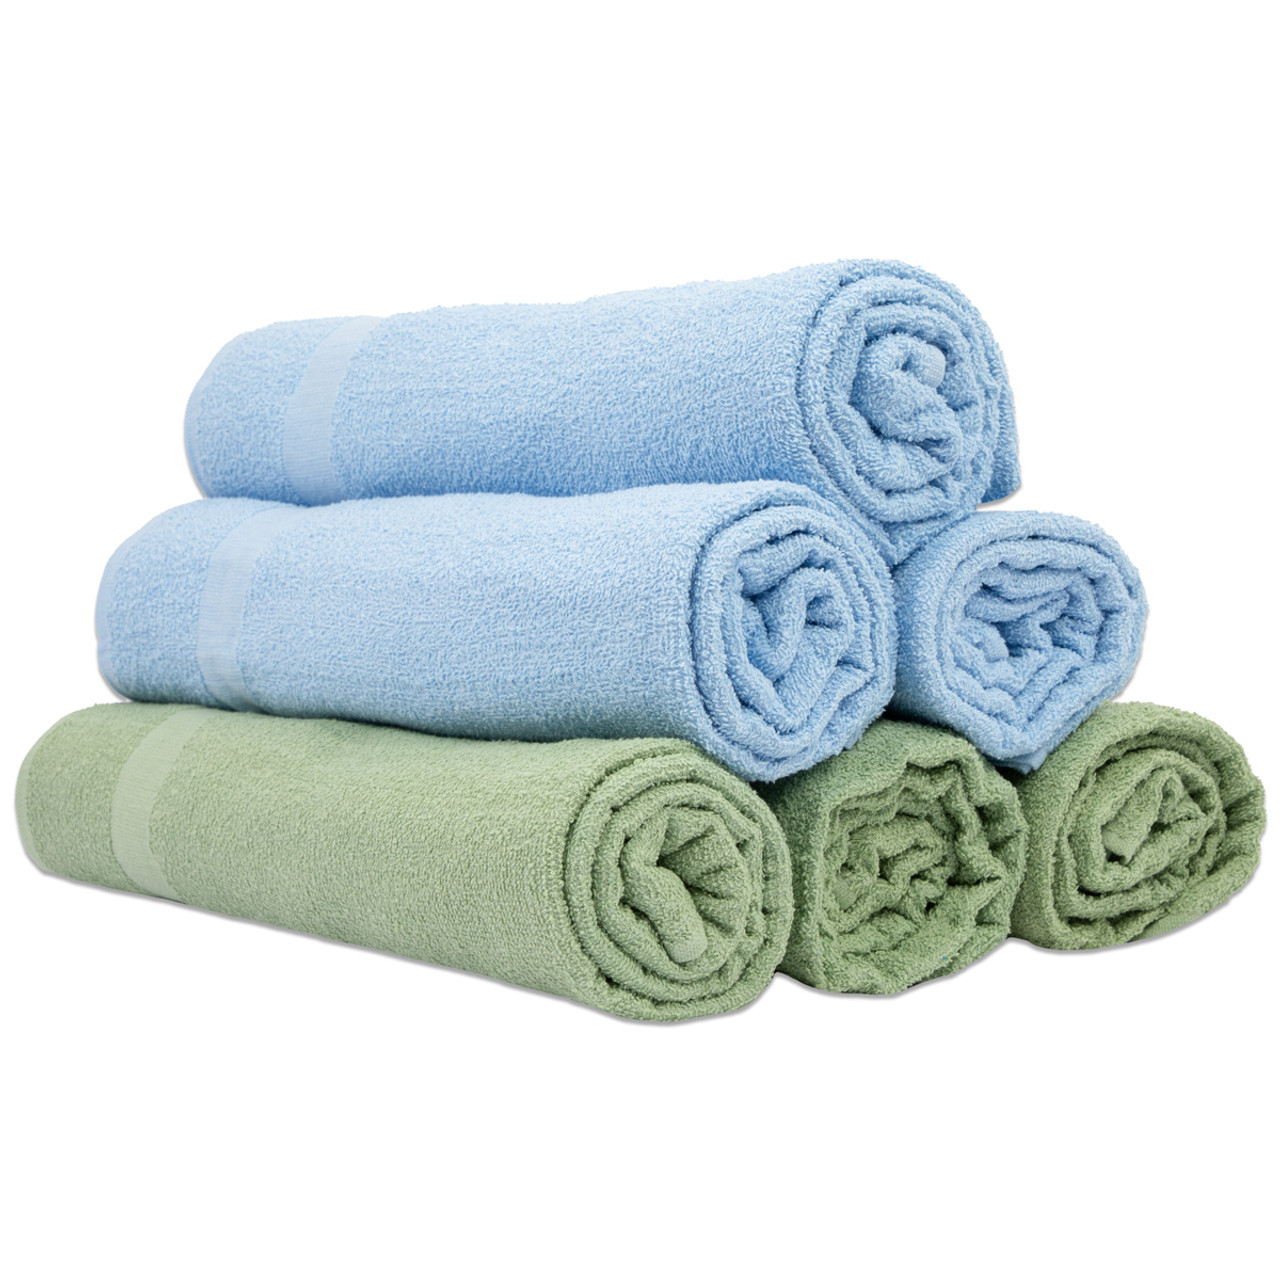 https://cdn11.bigcommerce.com/s-a5uwe4c7wz/images/stencil/1280x1280/products/970/2539/Cotton-Terry-Pool-Towels-36x68-Stack__70867.1688043662.jpg?c=1